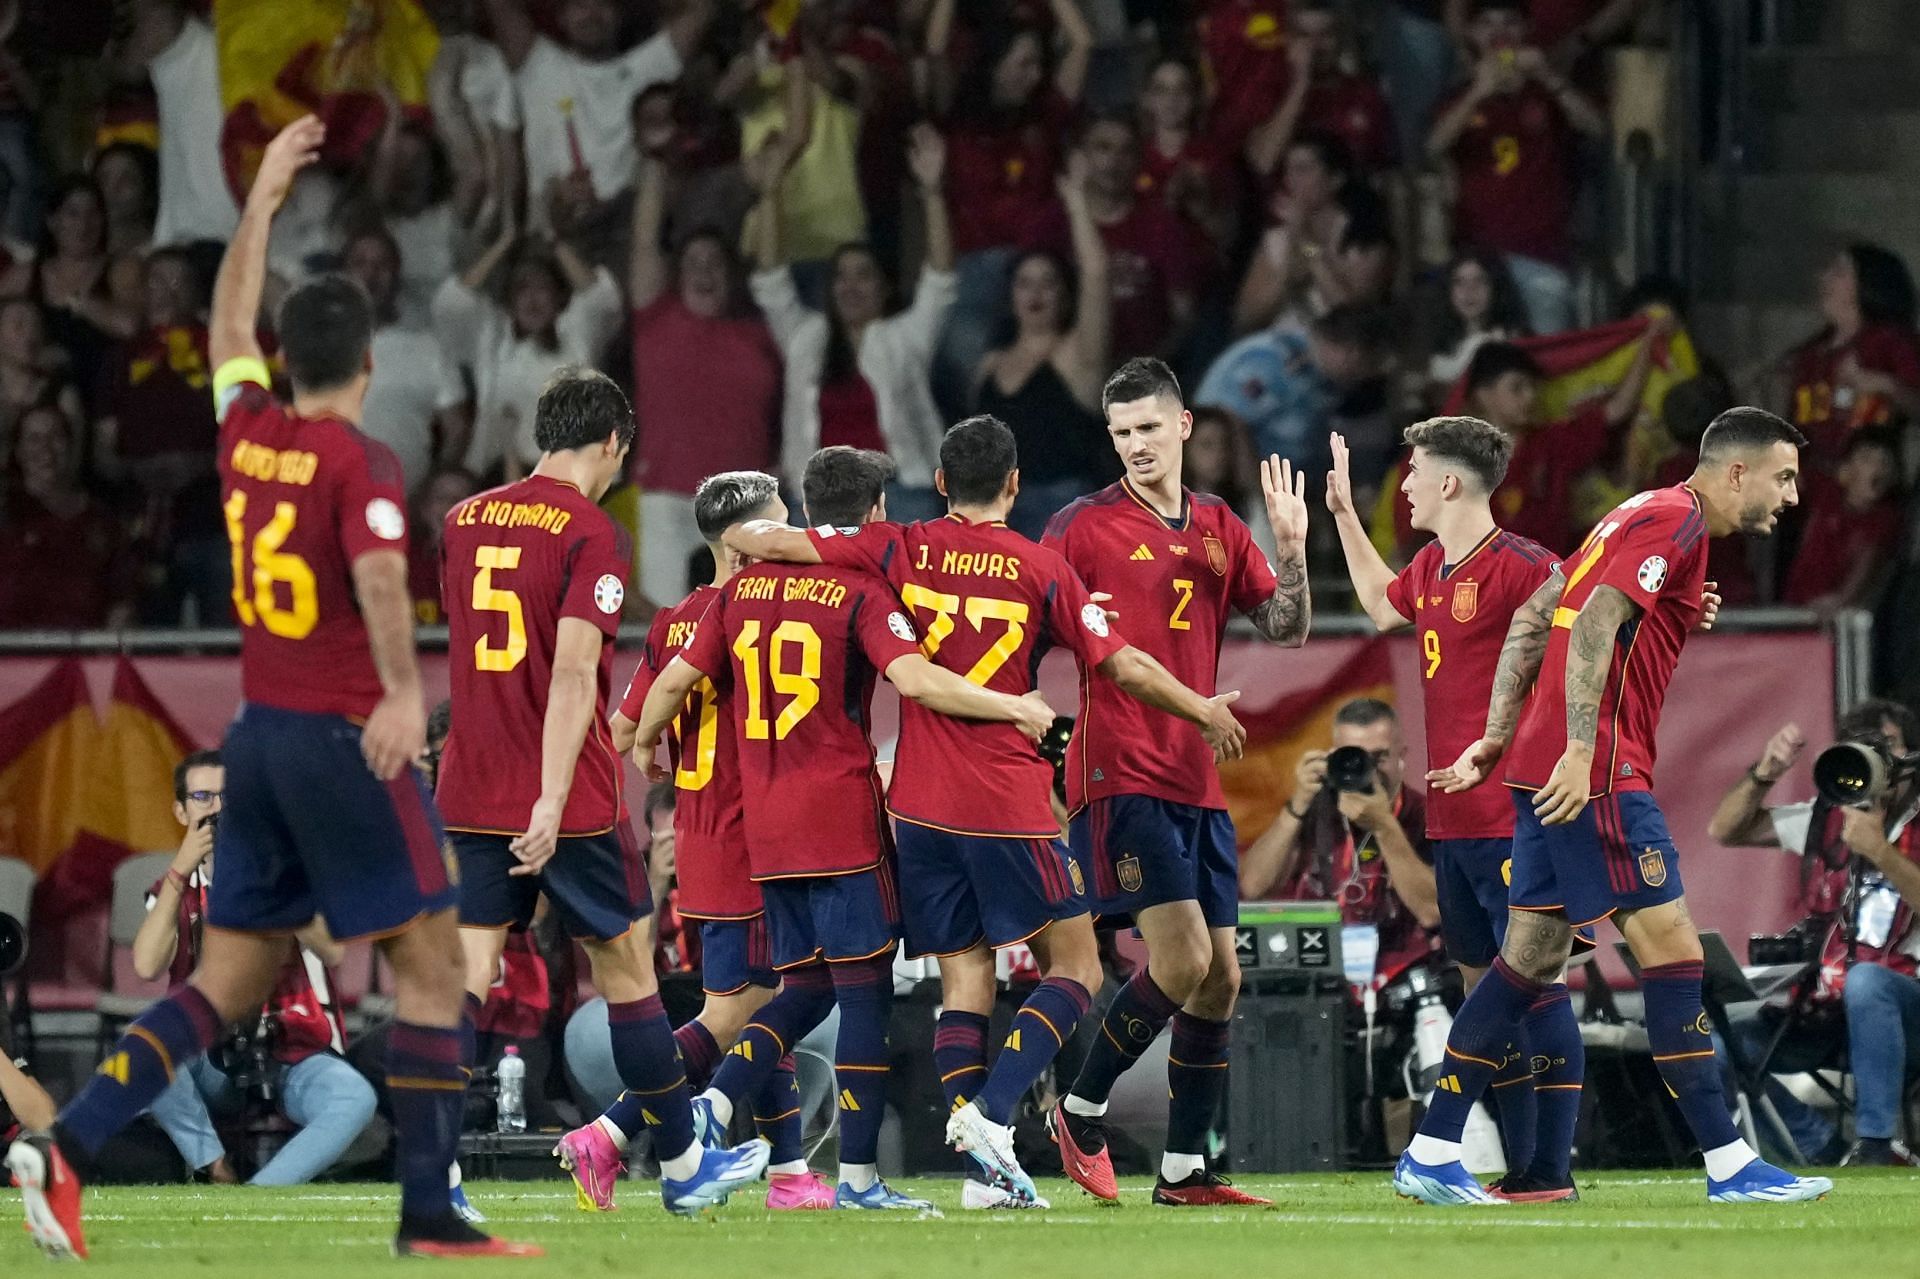 Spain 20 Scotland Player Ratings as La Roja leave it late to secure a